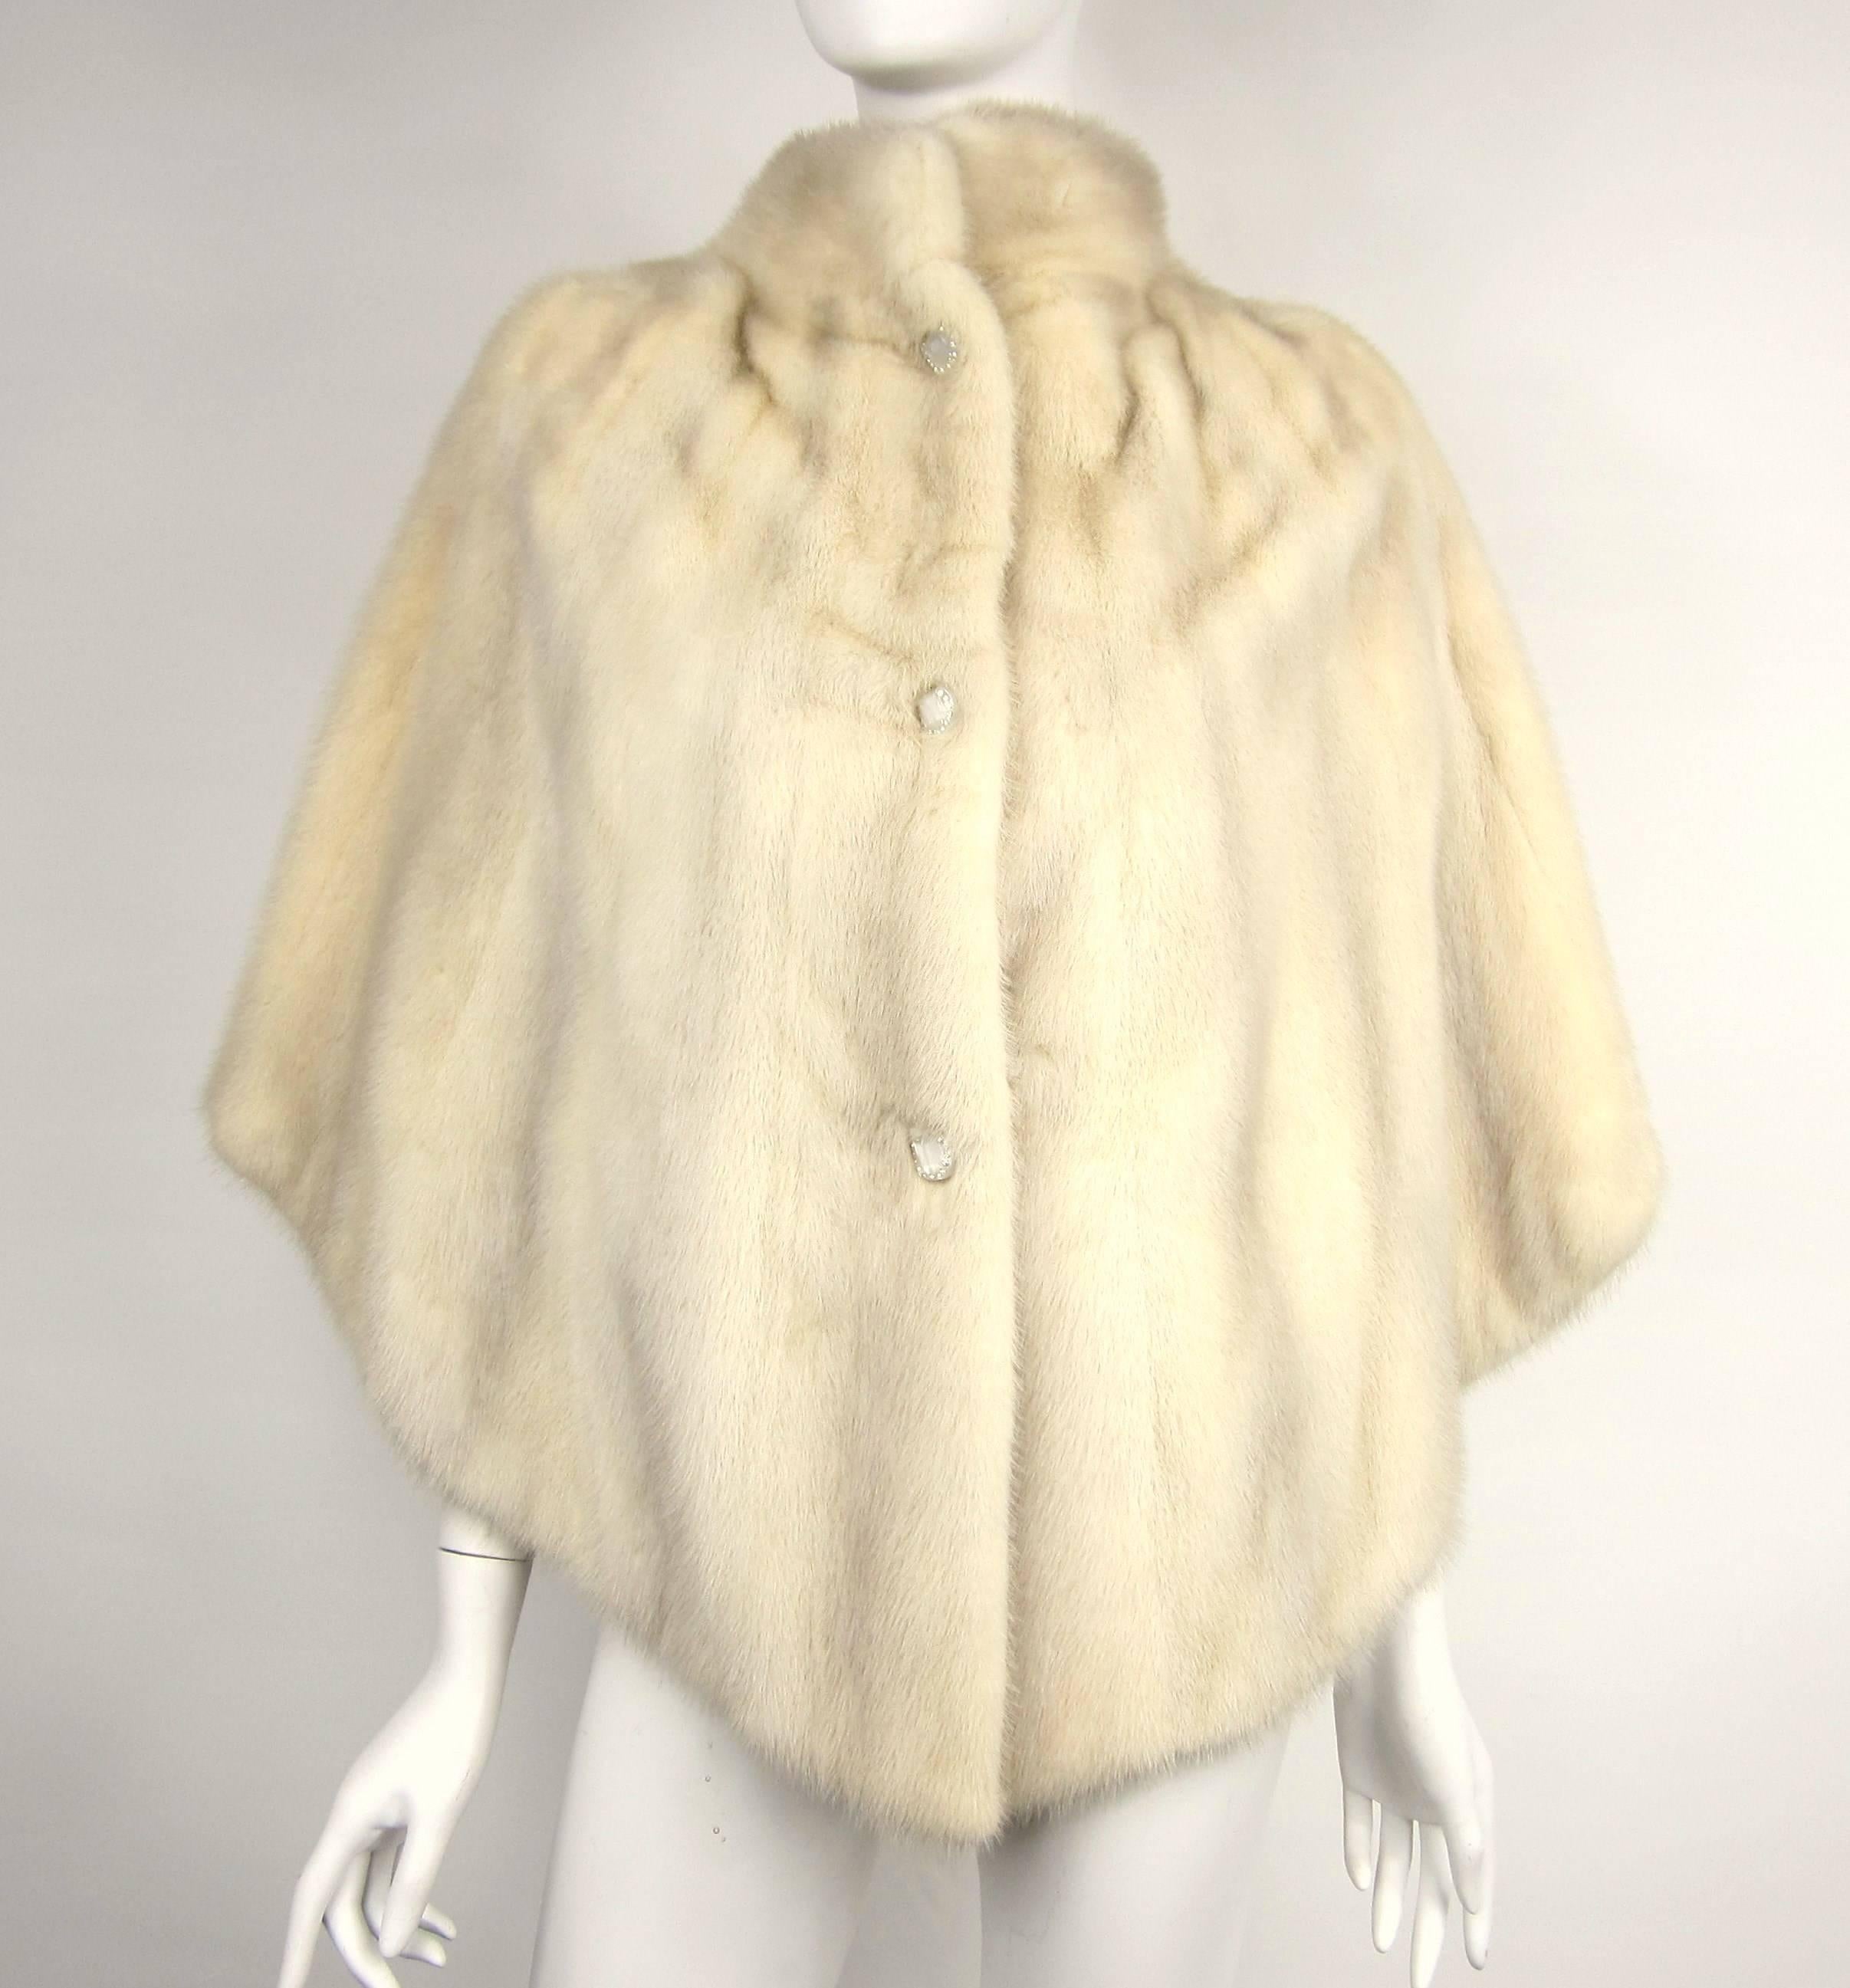 Here is a Wonderful reversible Pearl White Mink Caplet. Mink is soft and supple. Has a 3 Buttons closure, Pockets on the opposite side. Monogrammed inside. Measuring 28 in long, and will fit a small - Med. We have many more minks, foxes, and finches